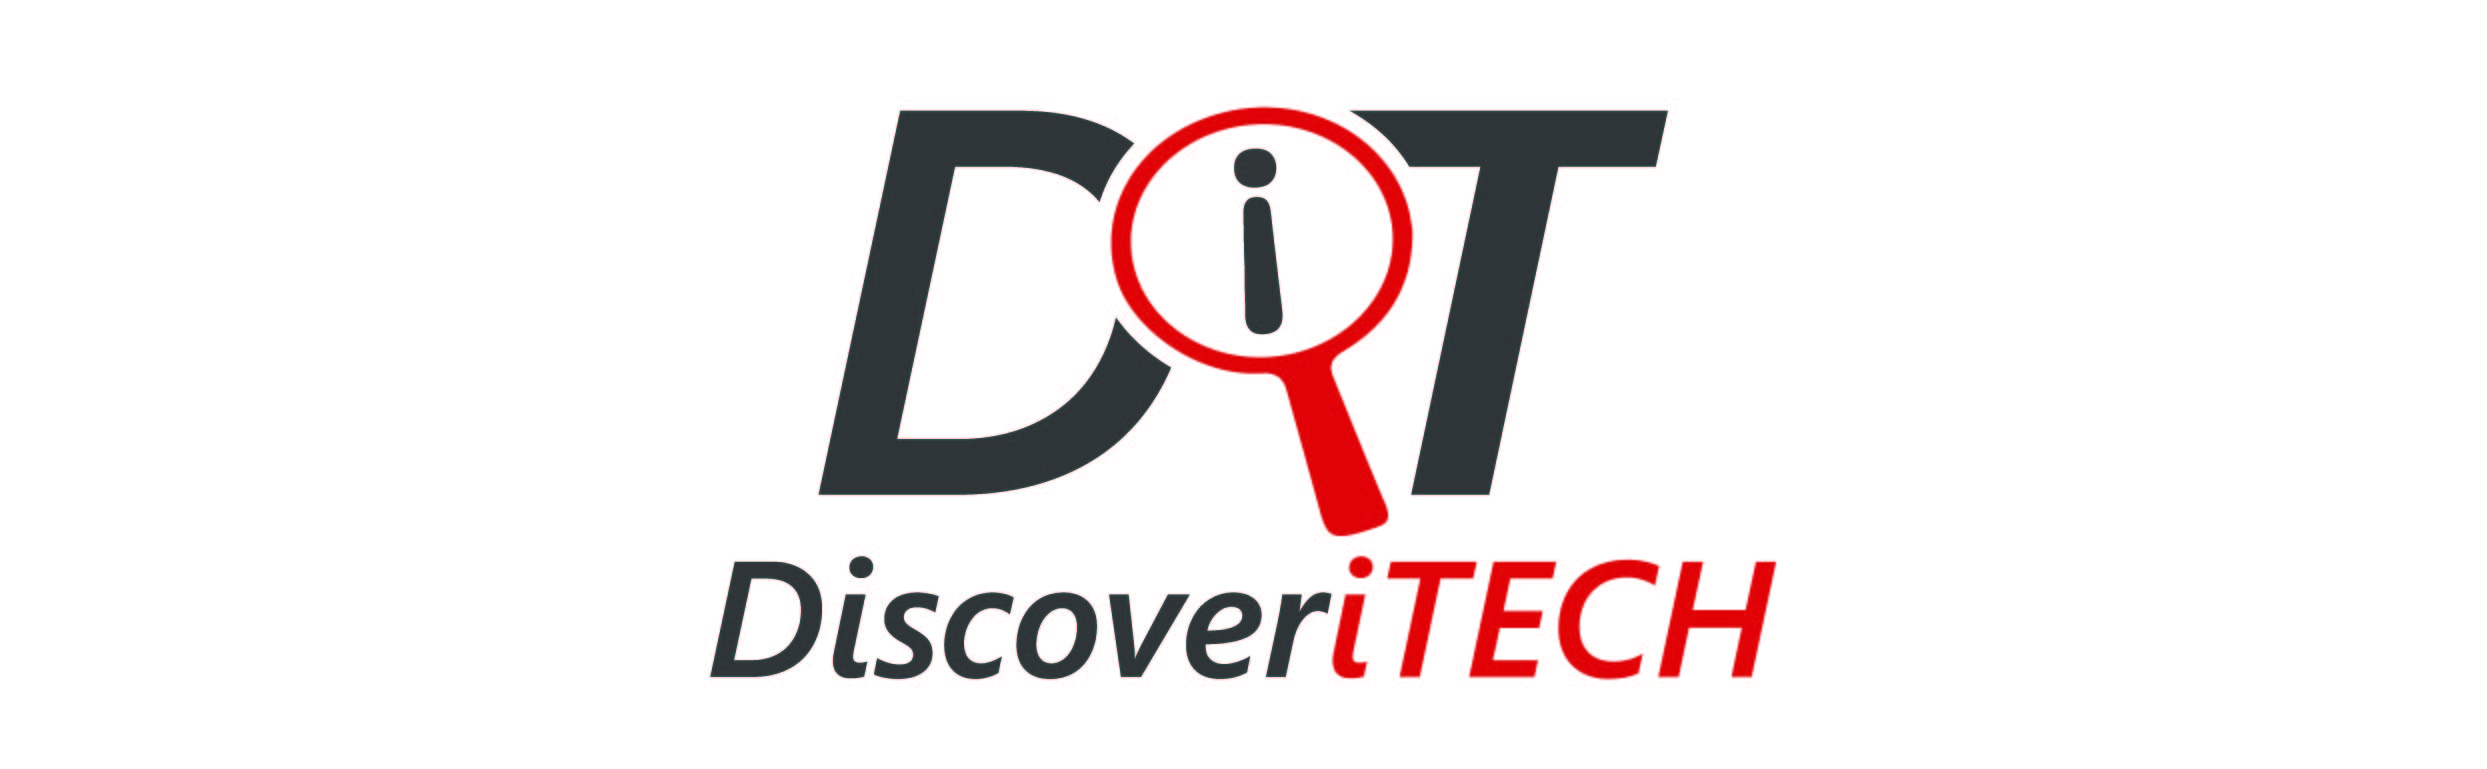 https://www.pakpositions.com/company/discoveritech